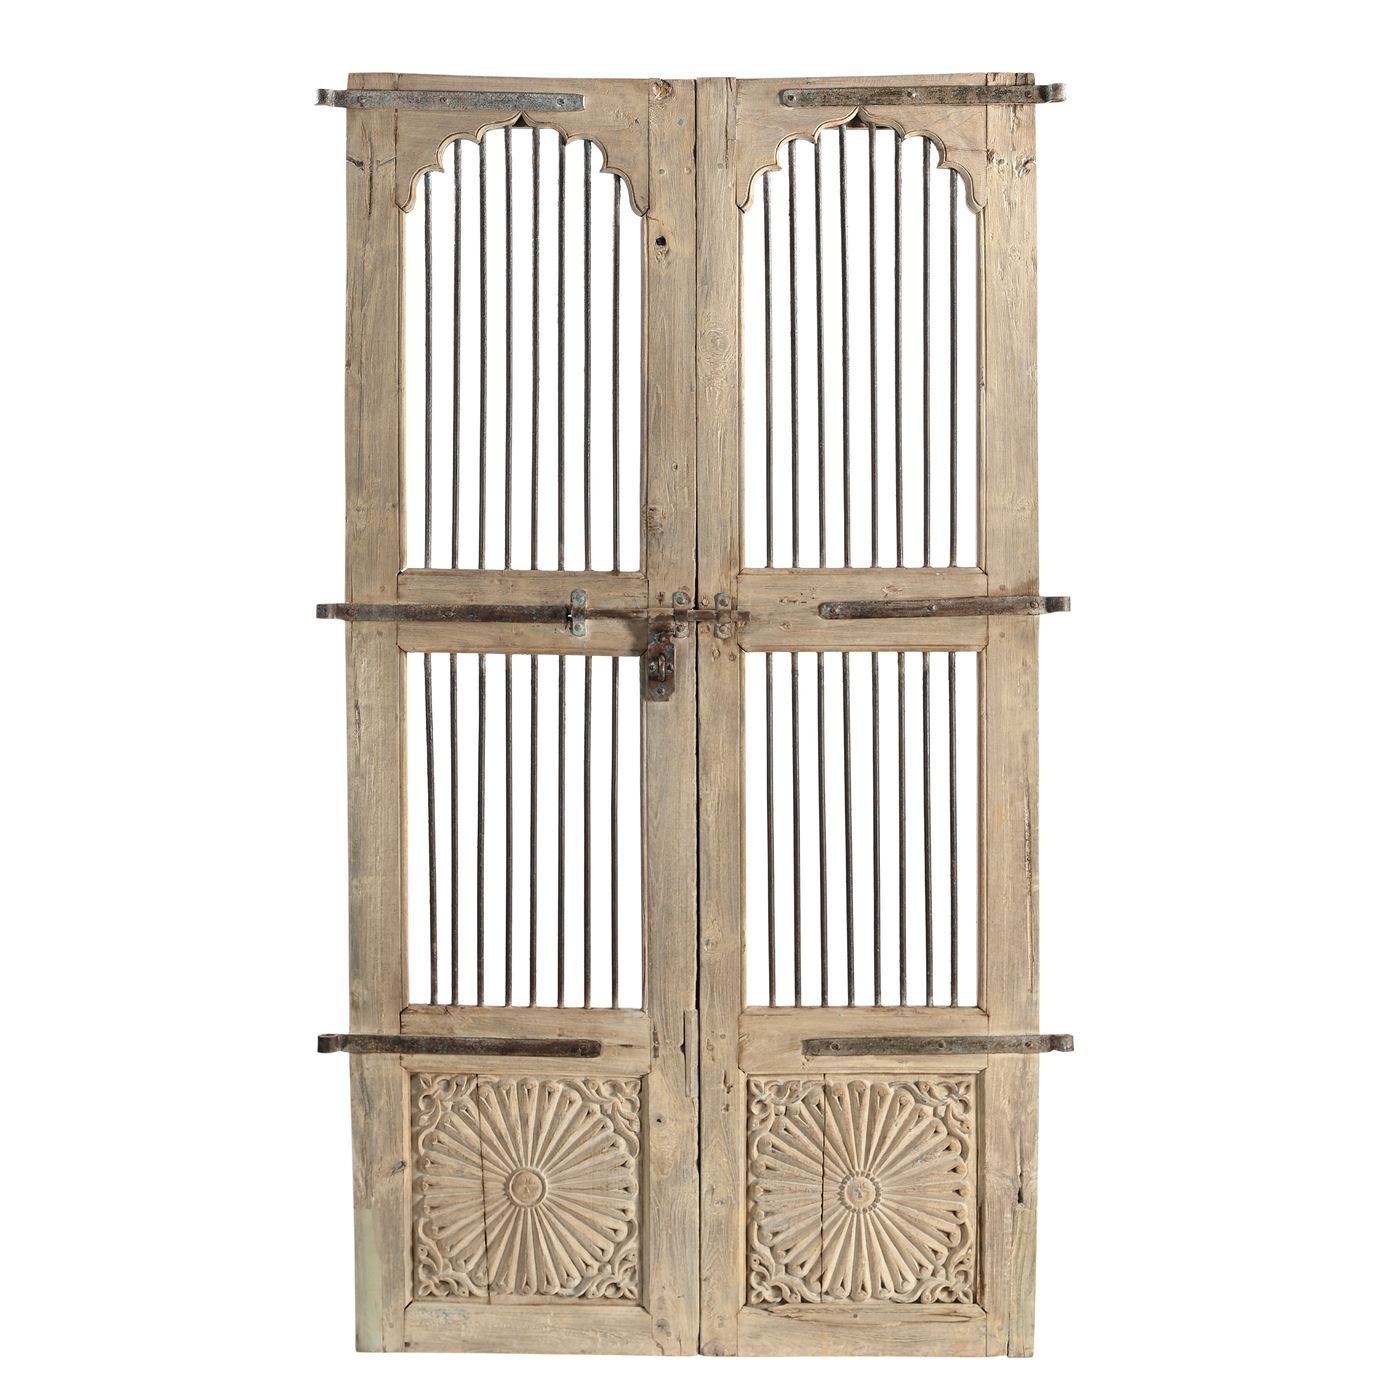 Sujasar - Carved Indian door with iron bars n°4